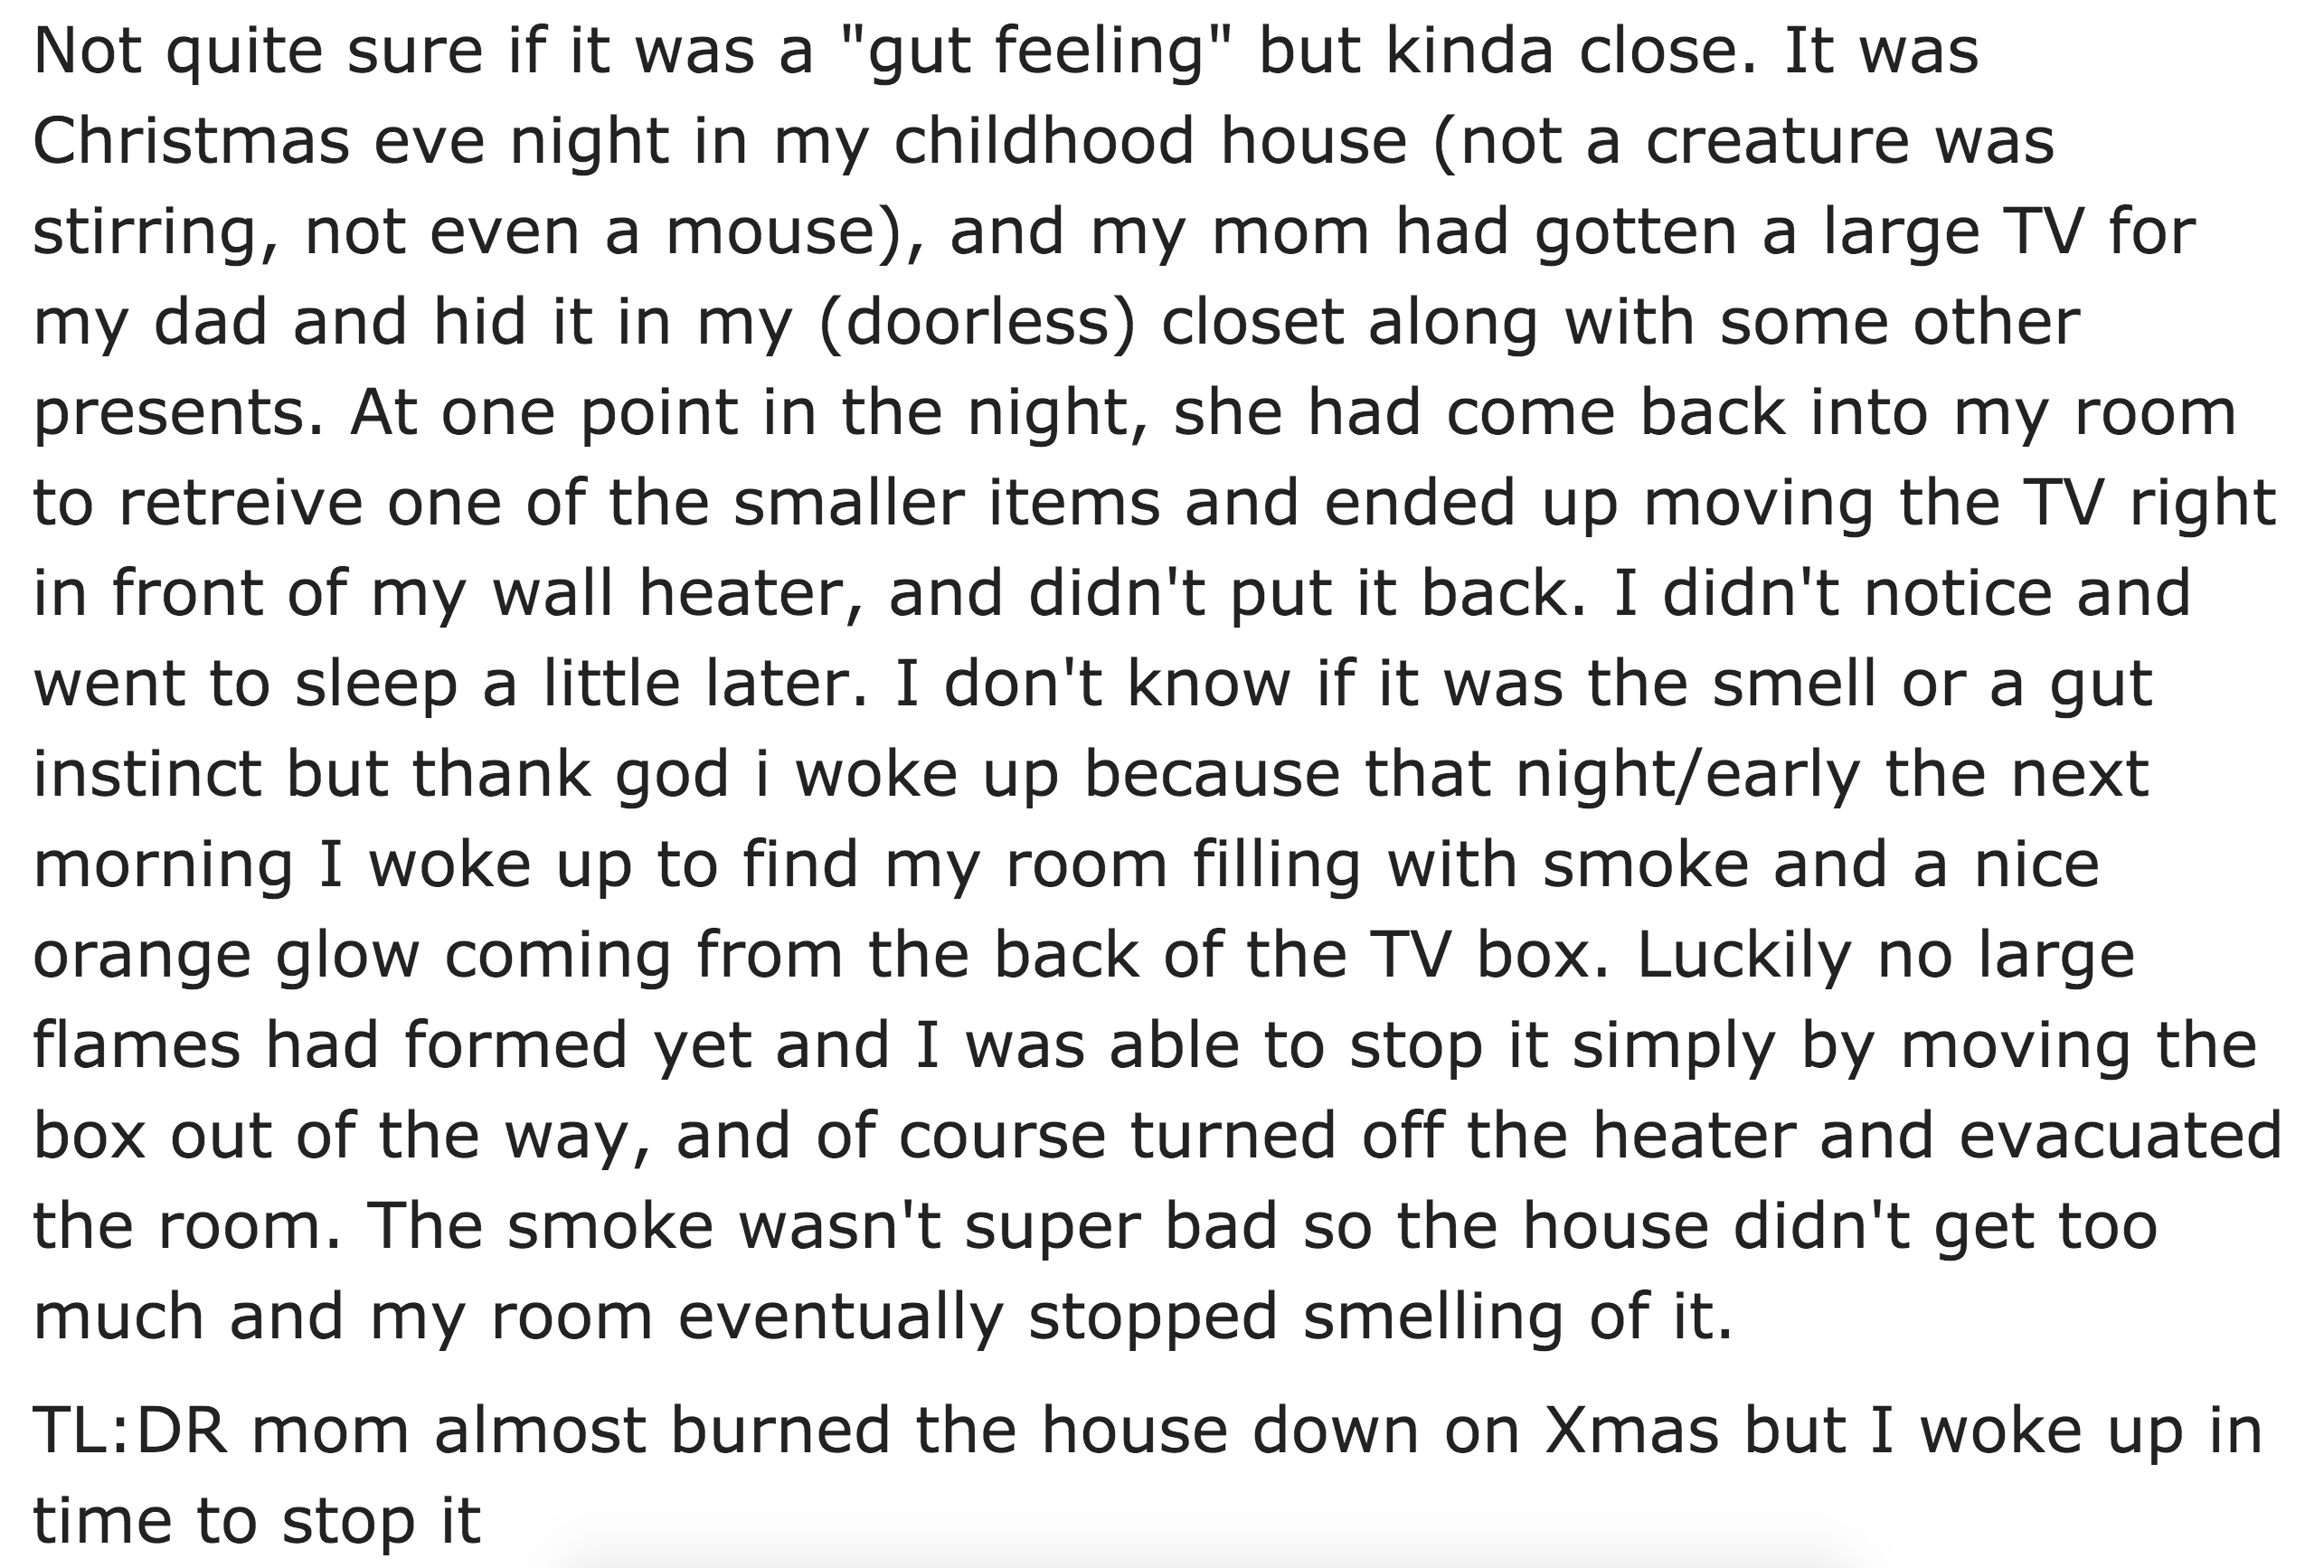 we don t do homework paragraph - Not quite sure if it was a "gut feeling" but kinda close. It was Christmas eve night in my childhood house not a creature was stirring, not even a mouse, and my mom had gotten a large Tv for my dad and hid it in my doorles